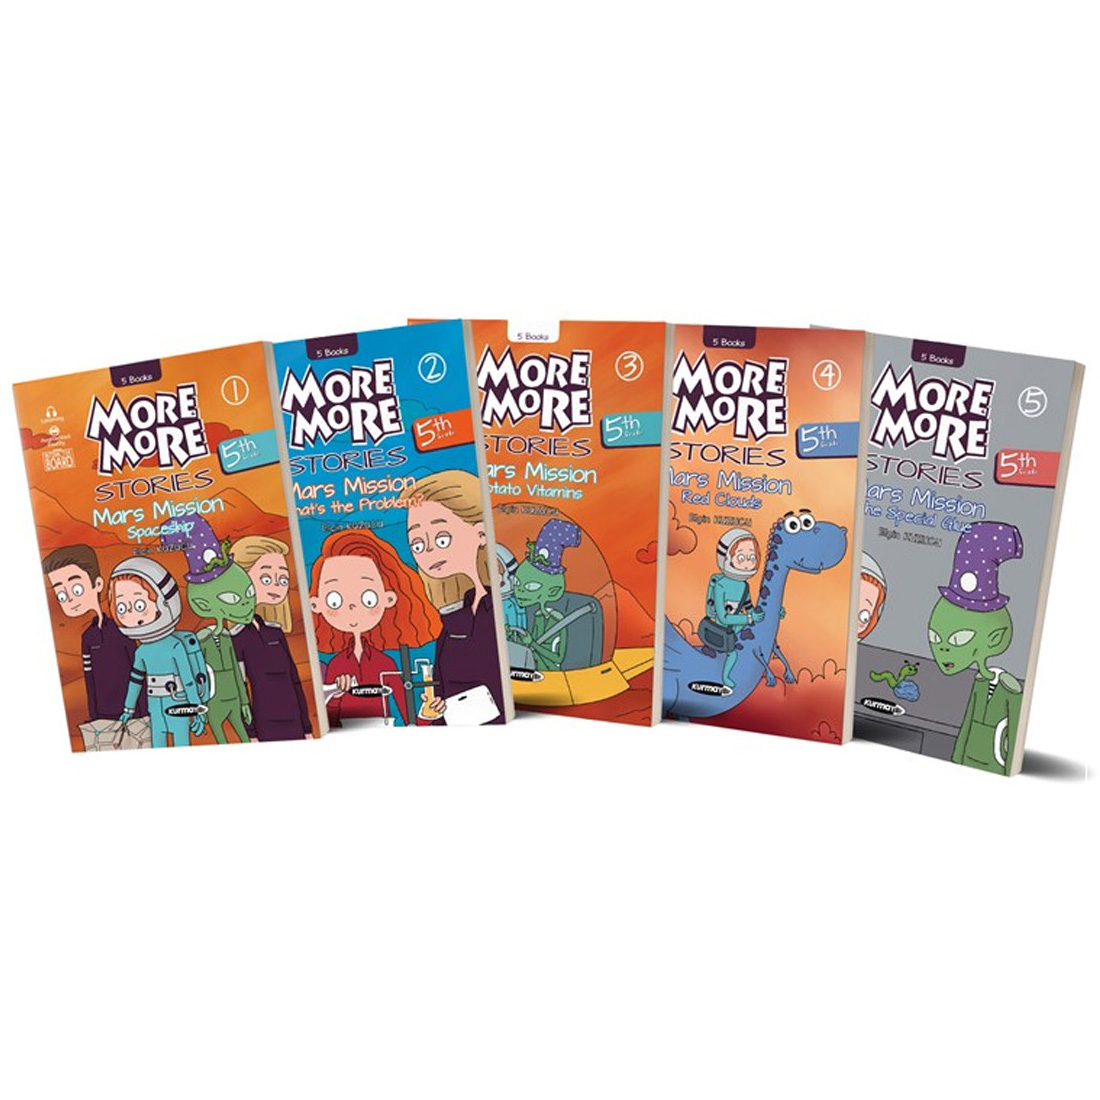 More More 5 th Grade Animated Stories Mars Mission